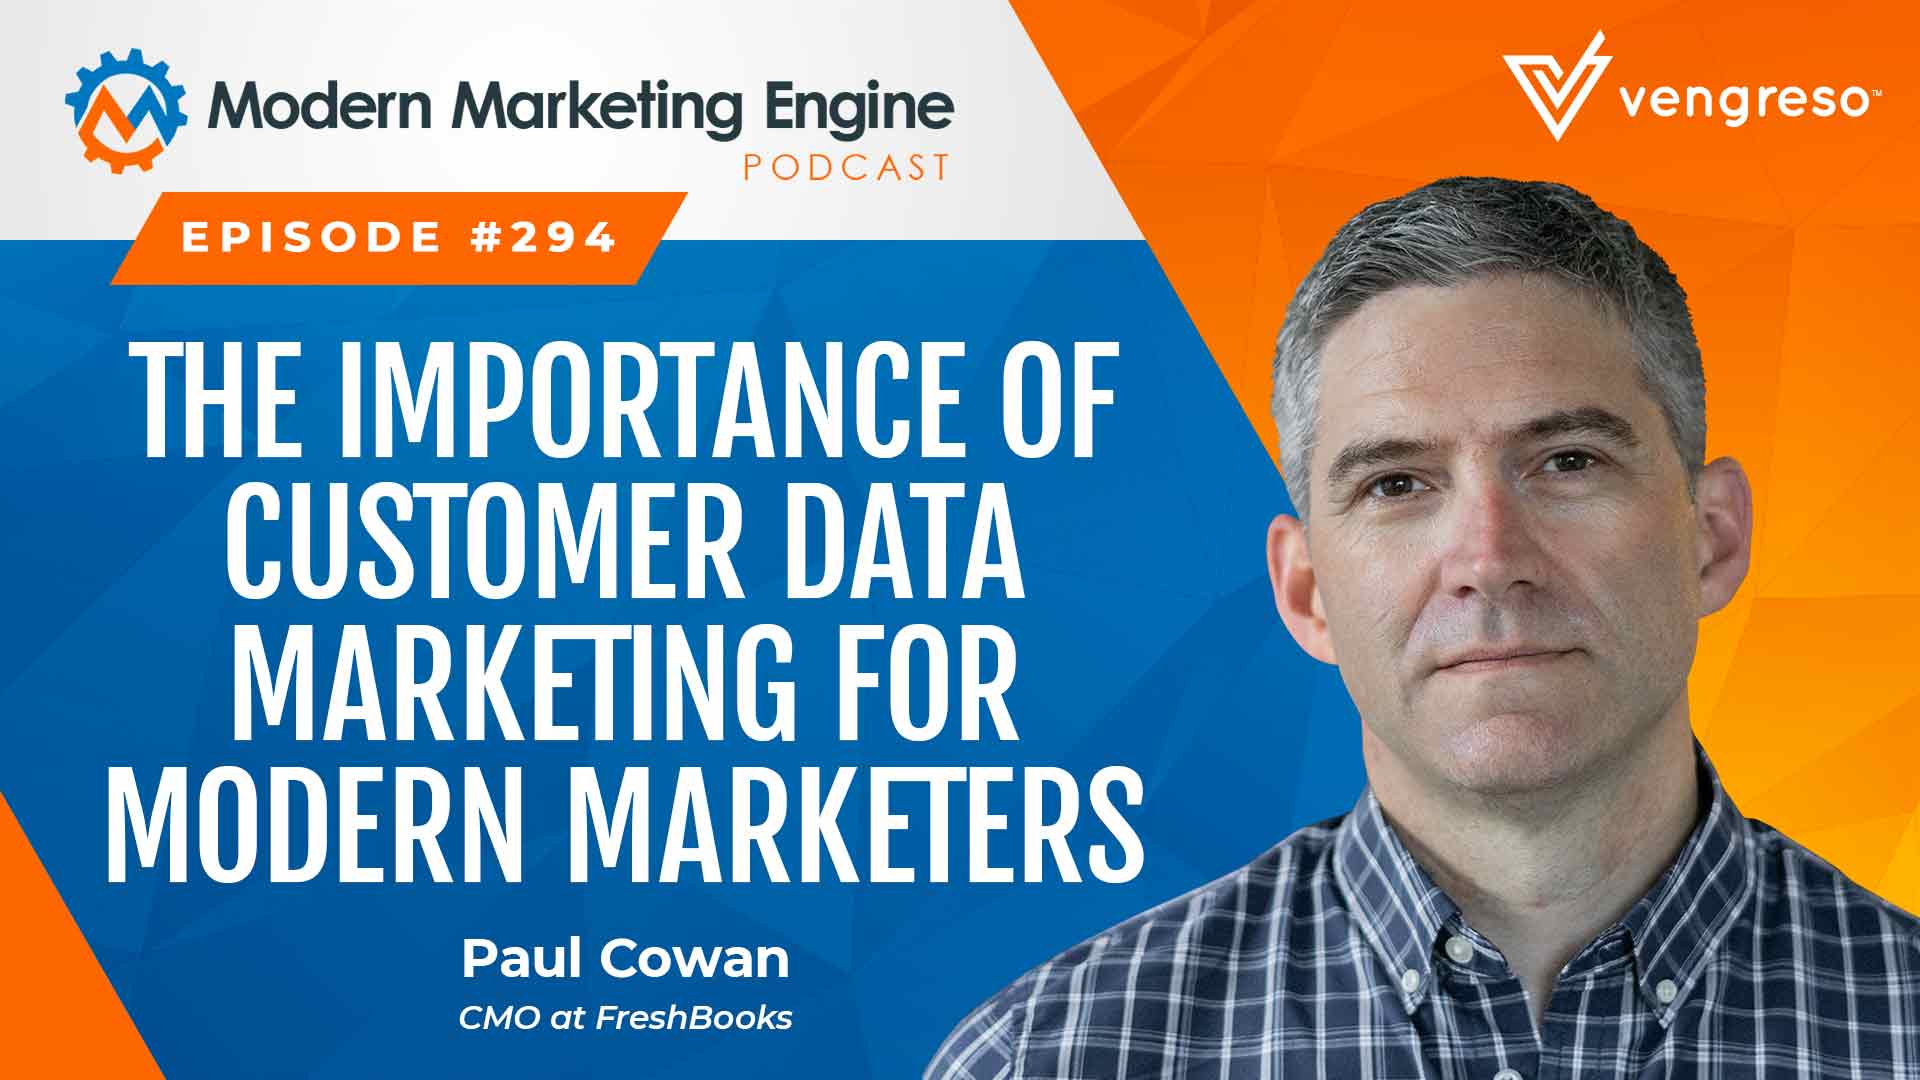 The Importance of Customer Data Marketing for Modern Marketers